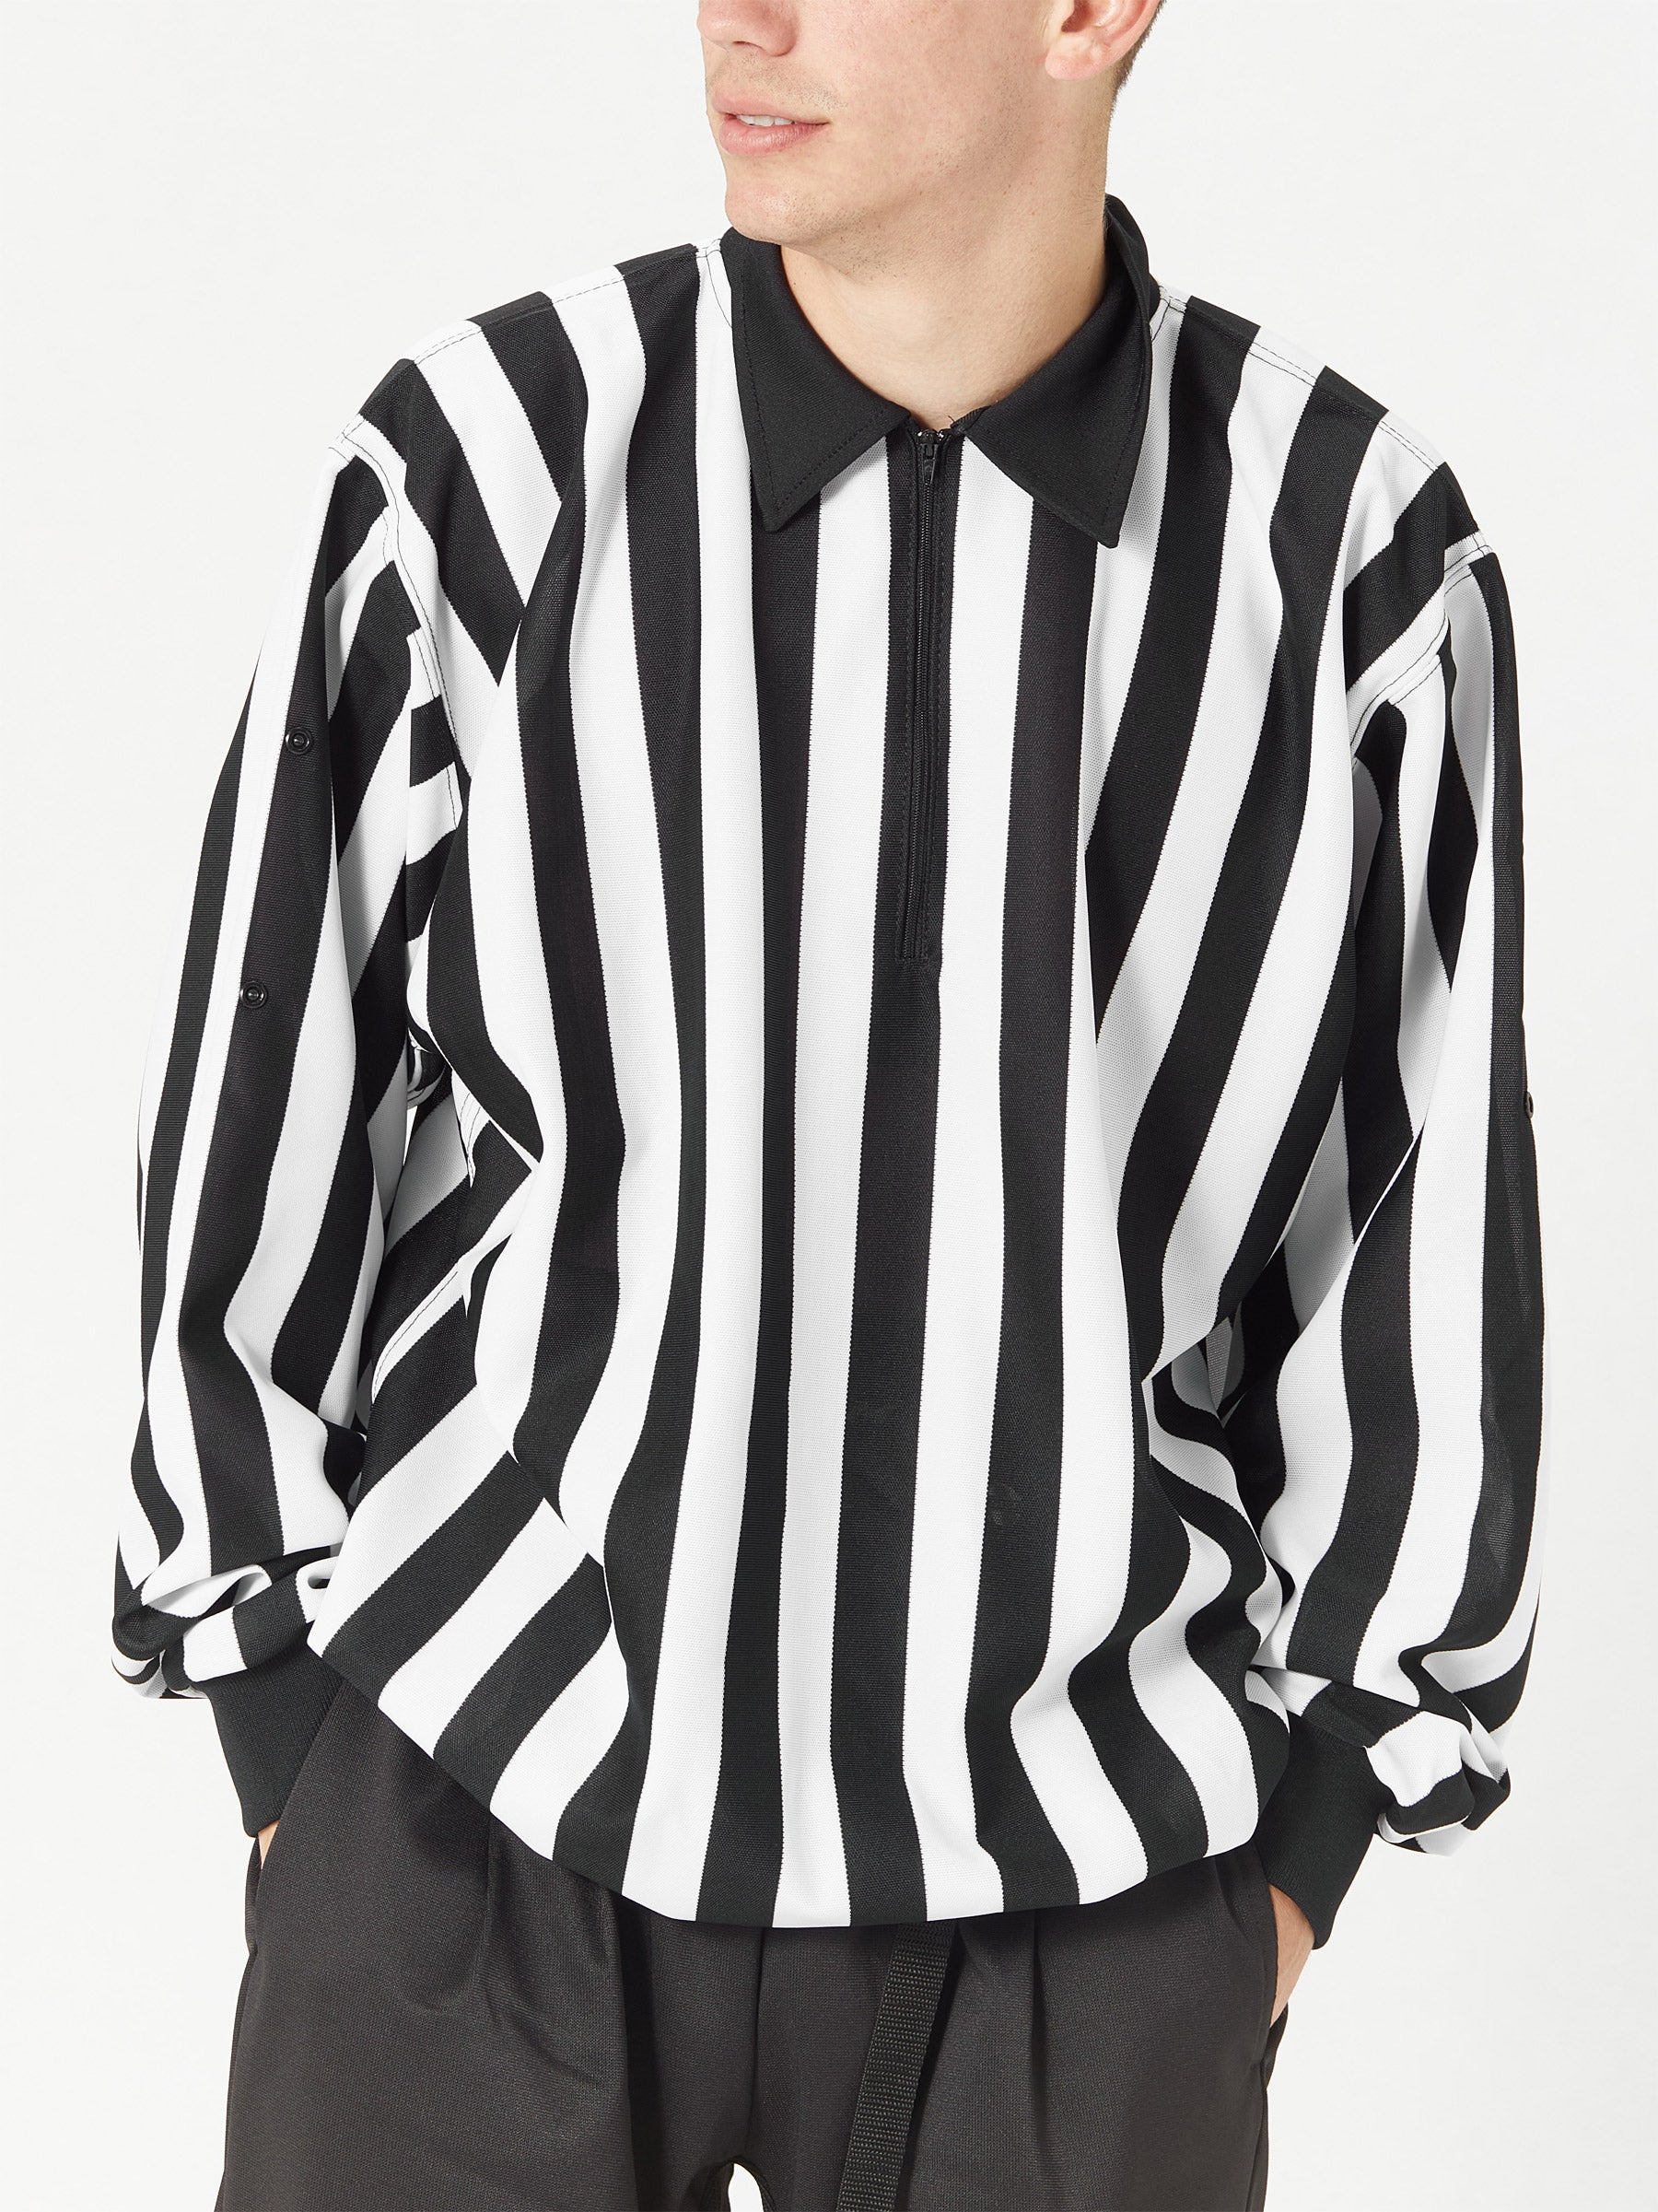 Details about   CCM M-150 Replica Referee Jersey 1/2 Zip Longsleeve Ref Pullover Official Shirt 